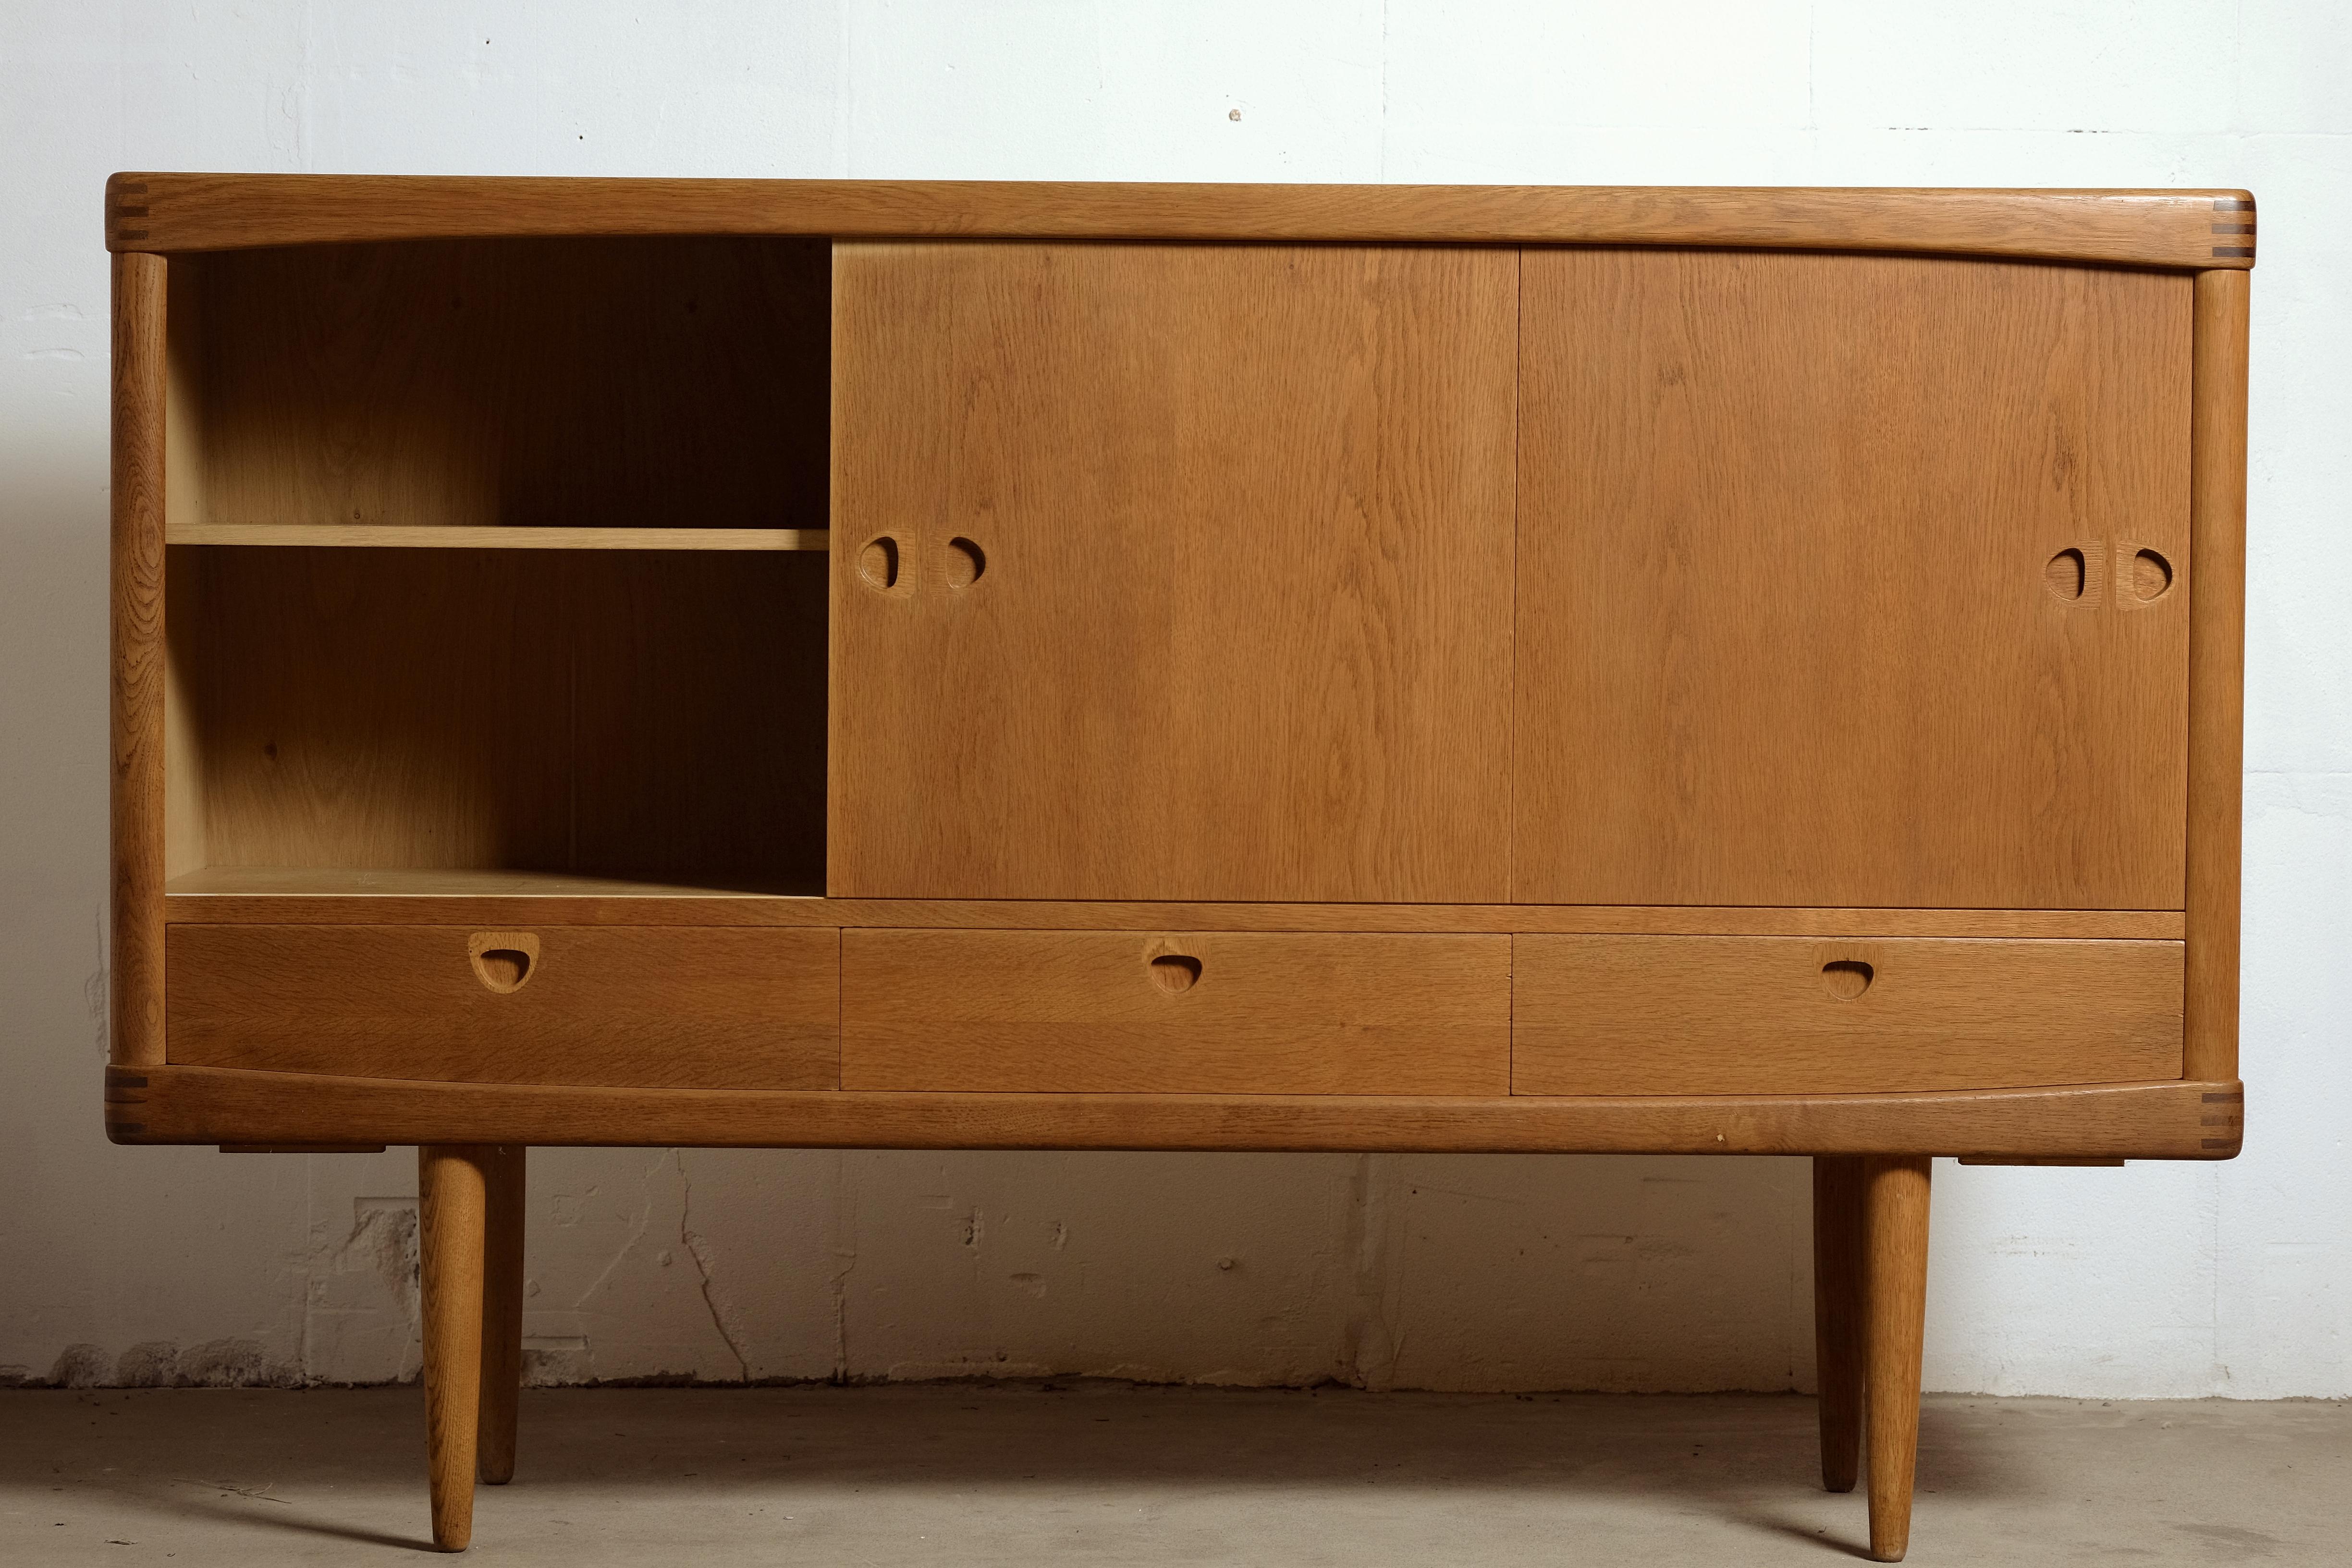 Sideboard by H.W Klein for Bramin Møbelfabrik in oak.
Klein has designed many sideboards which are classics today, including this one. Beautiful design in very good quality.
The piece is in very good vintage condition, the veneer has loosened at a